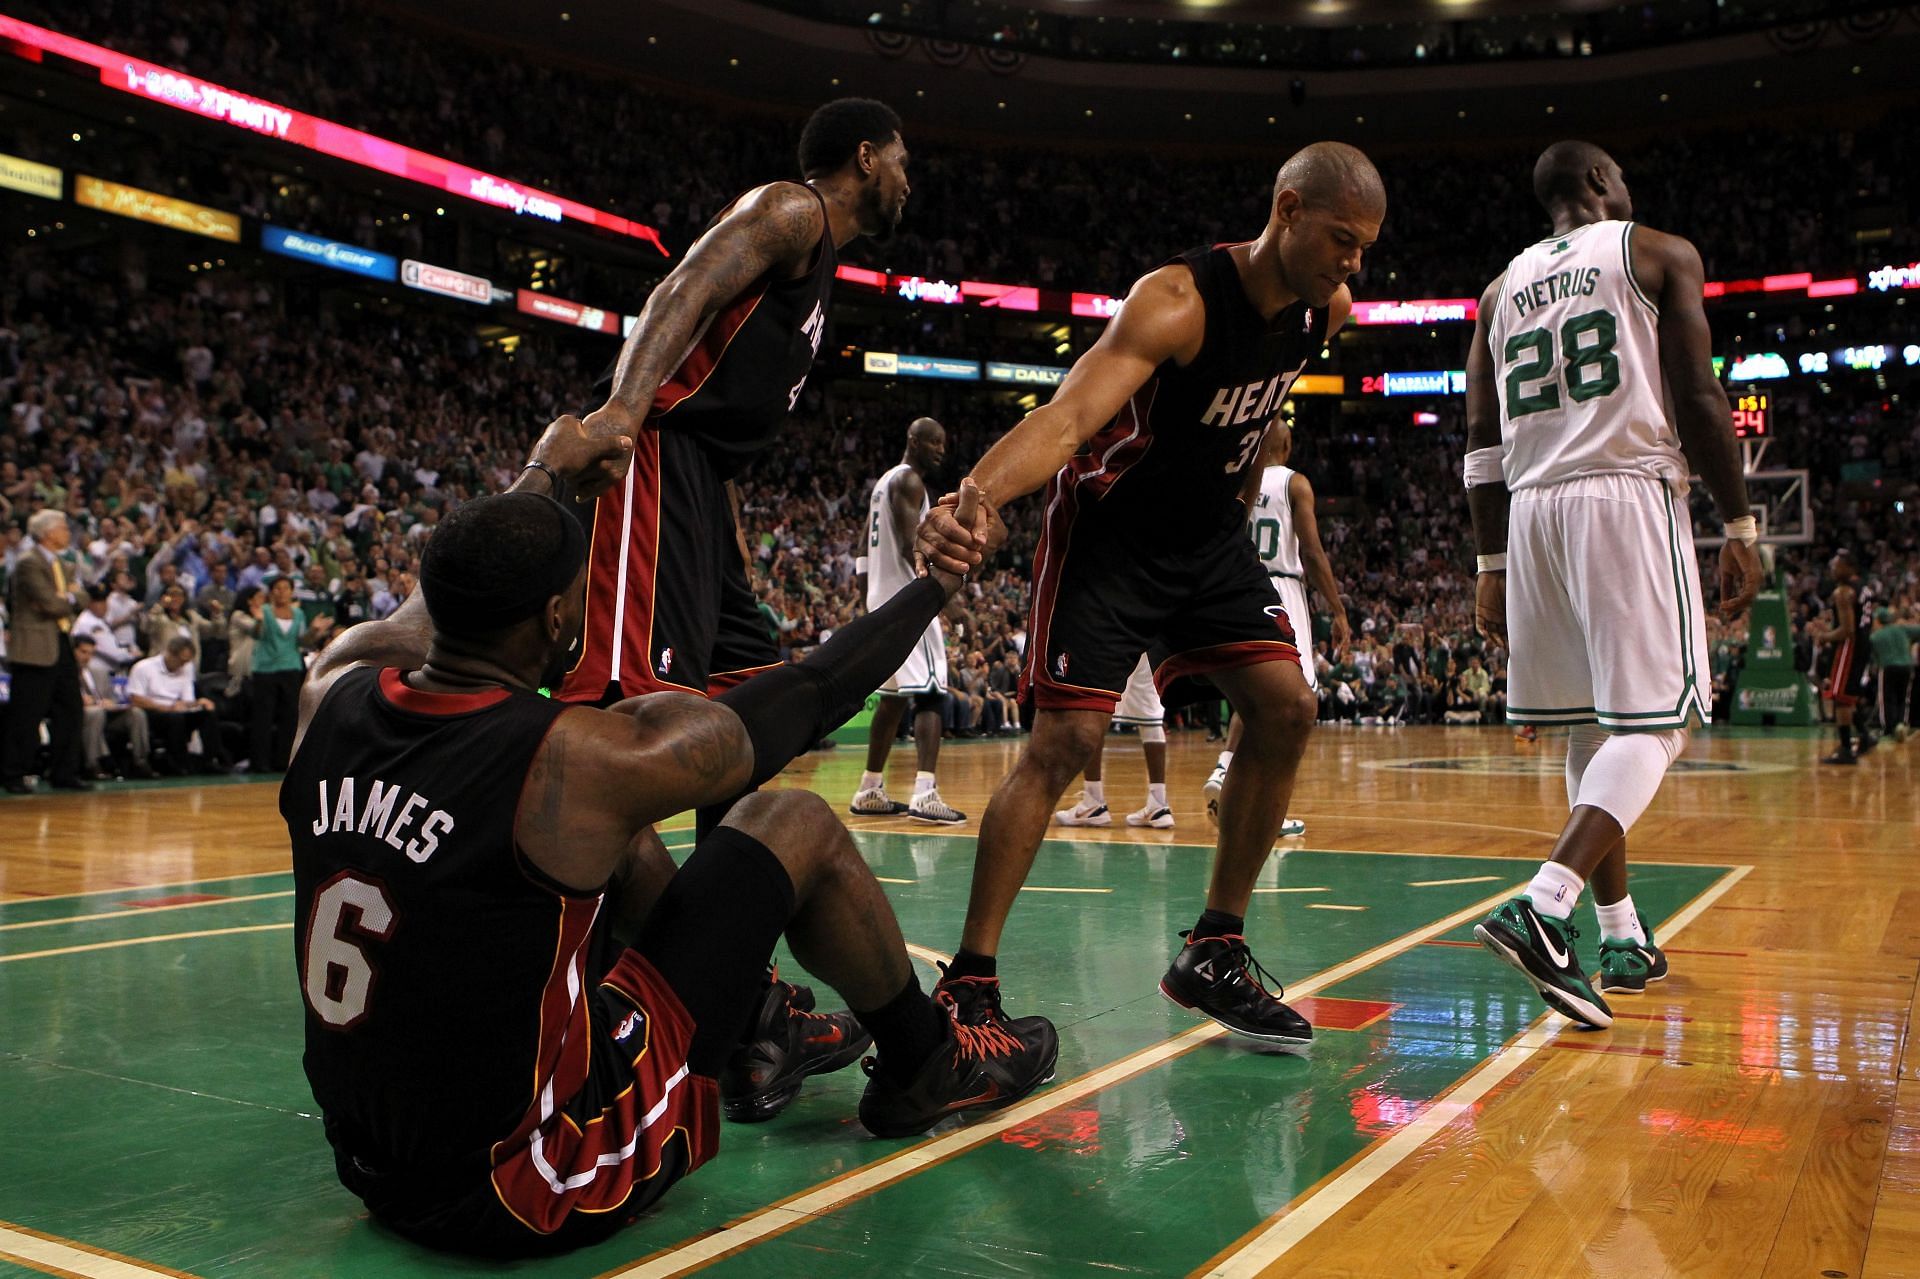 Shane Battier and Udonis Haslem were big teammates of LeBron James during the Miami Heat title runs